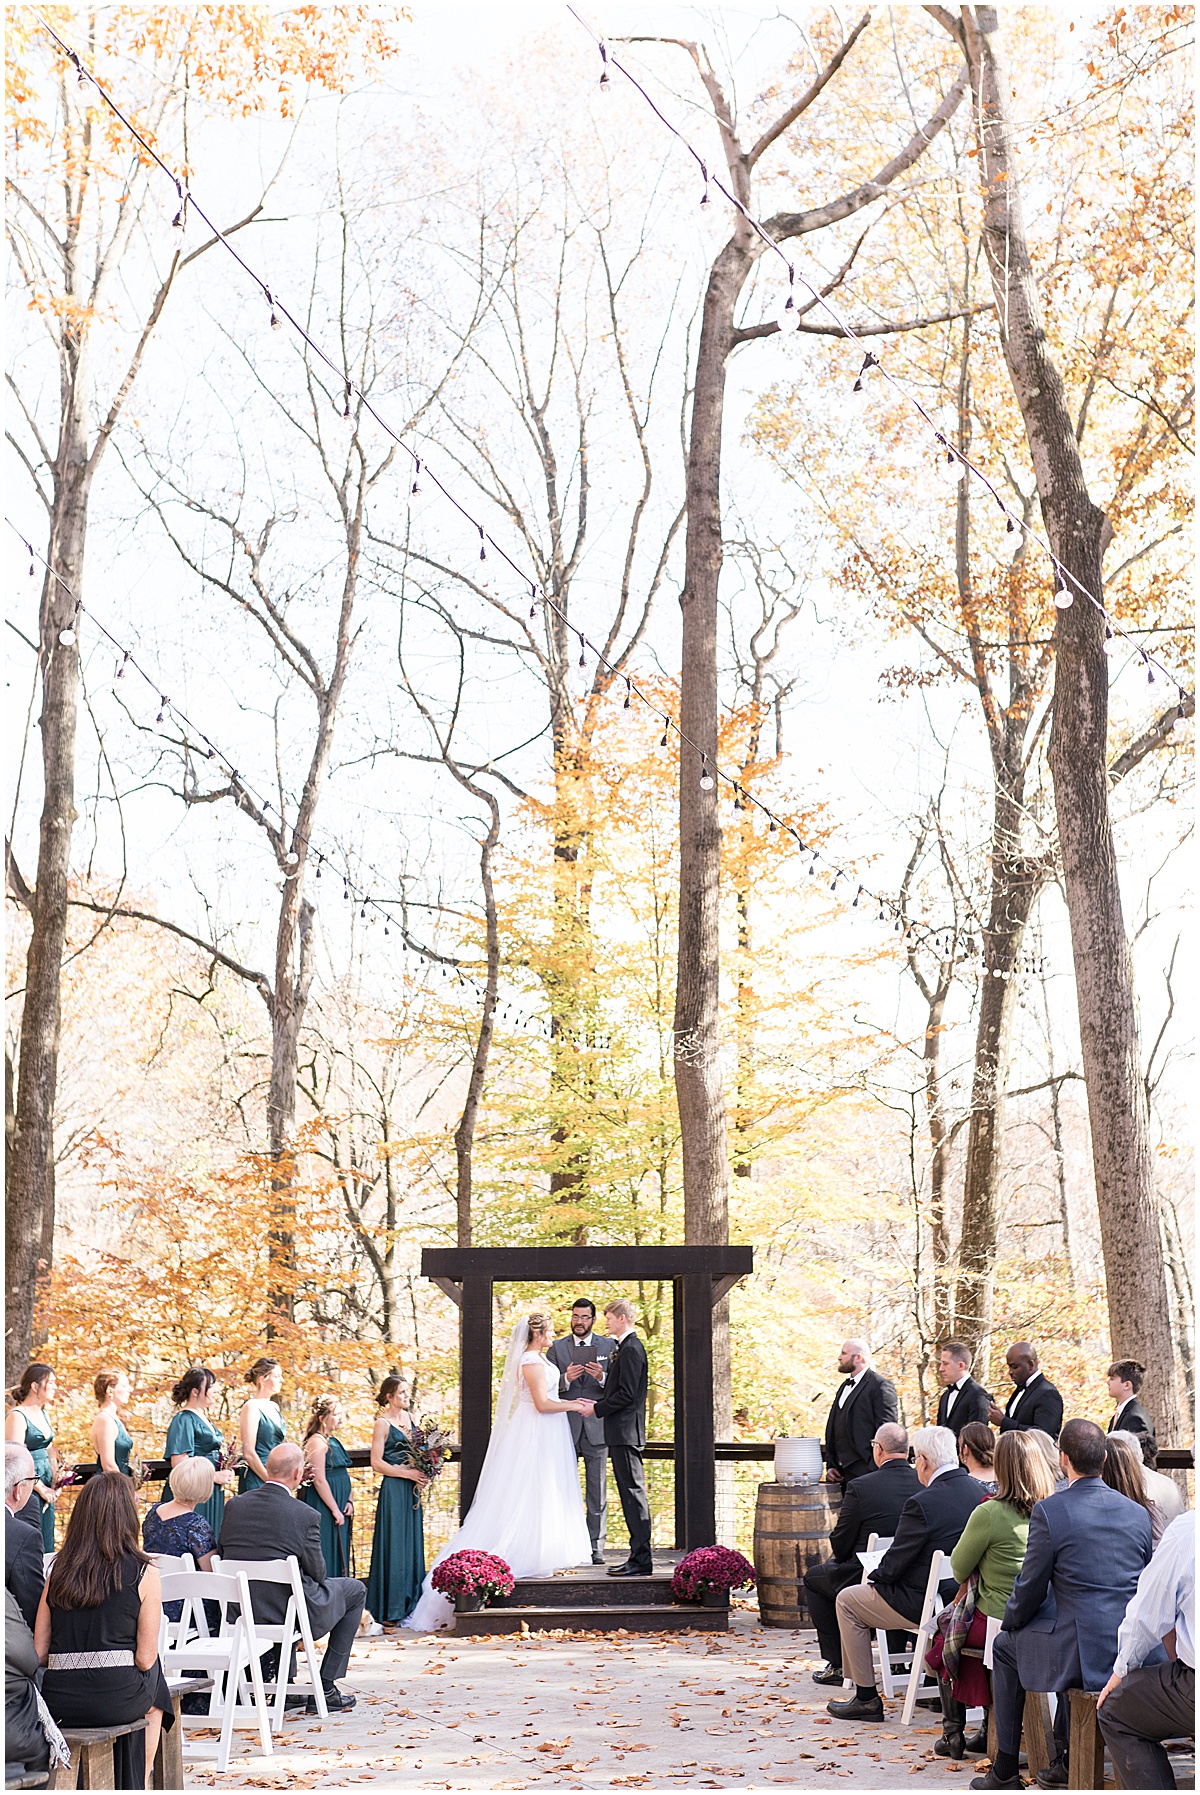 Wedding ceremony in fall leaves at fall wedding at 3 Fat Labs in Greencastle, Indiana